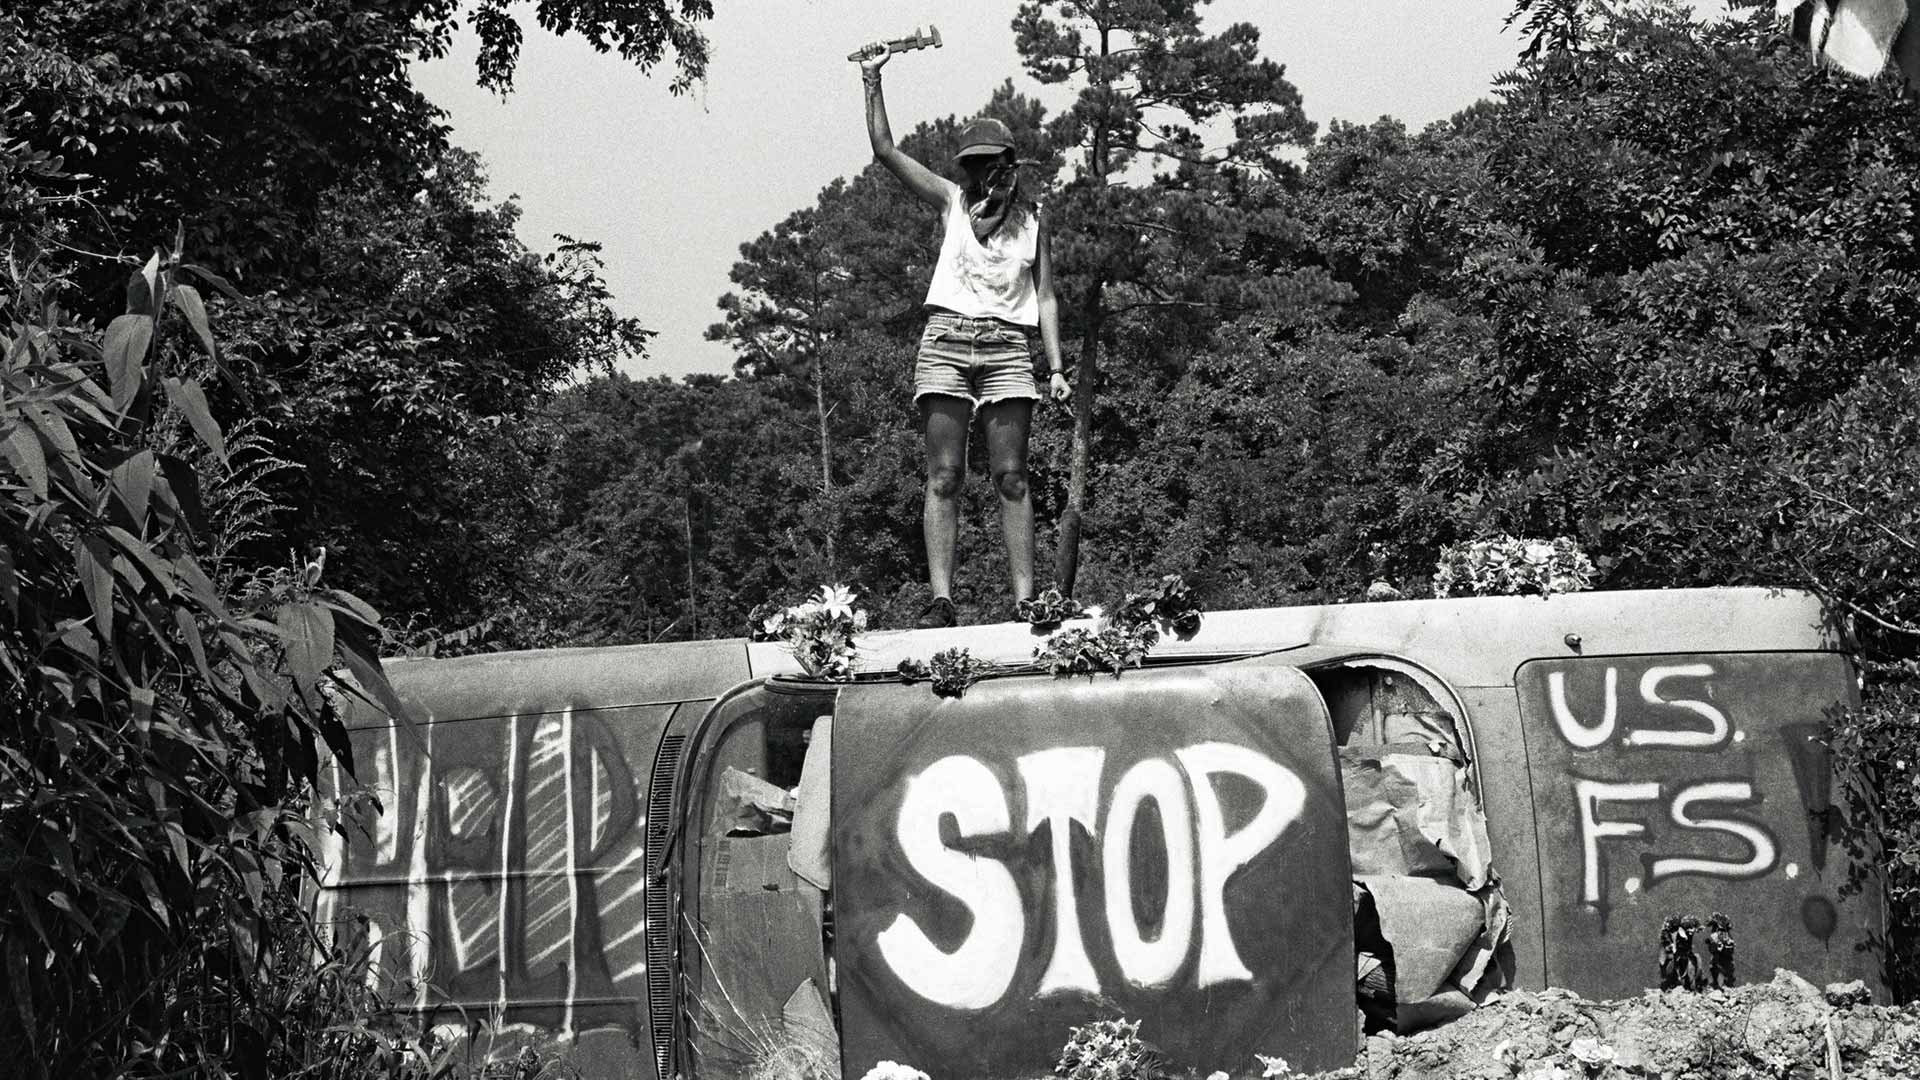 Greyscale picture of an activist standing on a tilted car with the words 